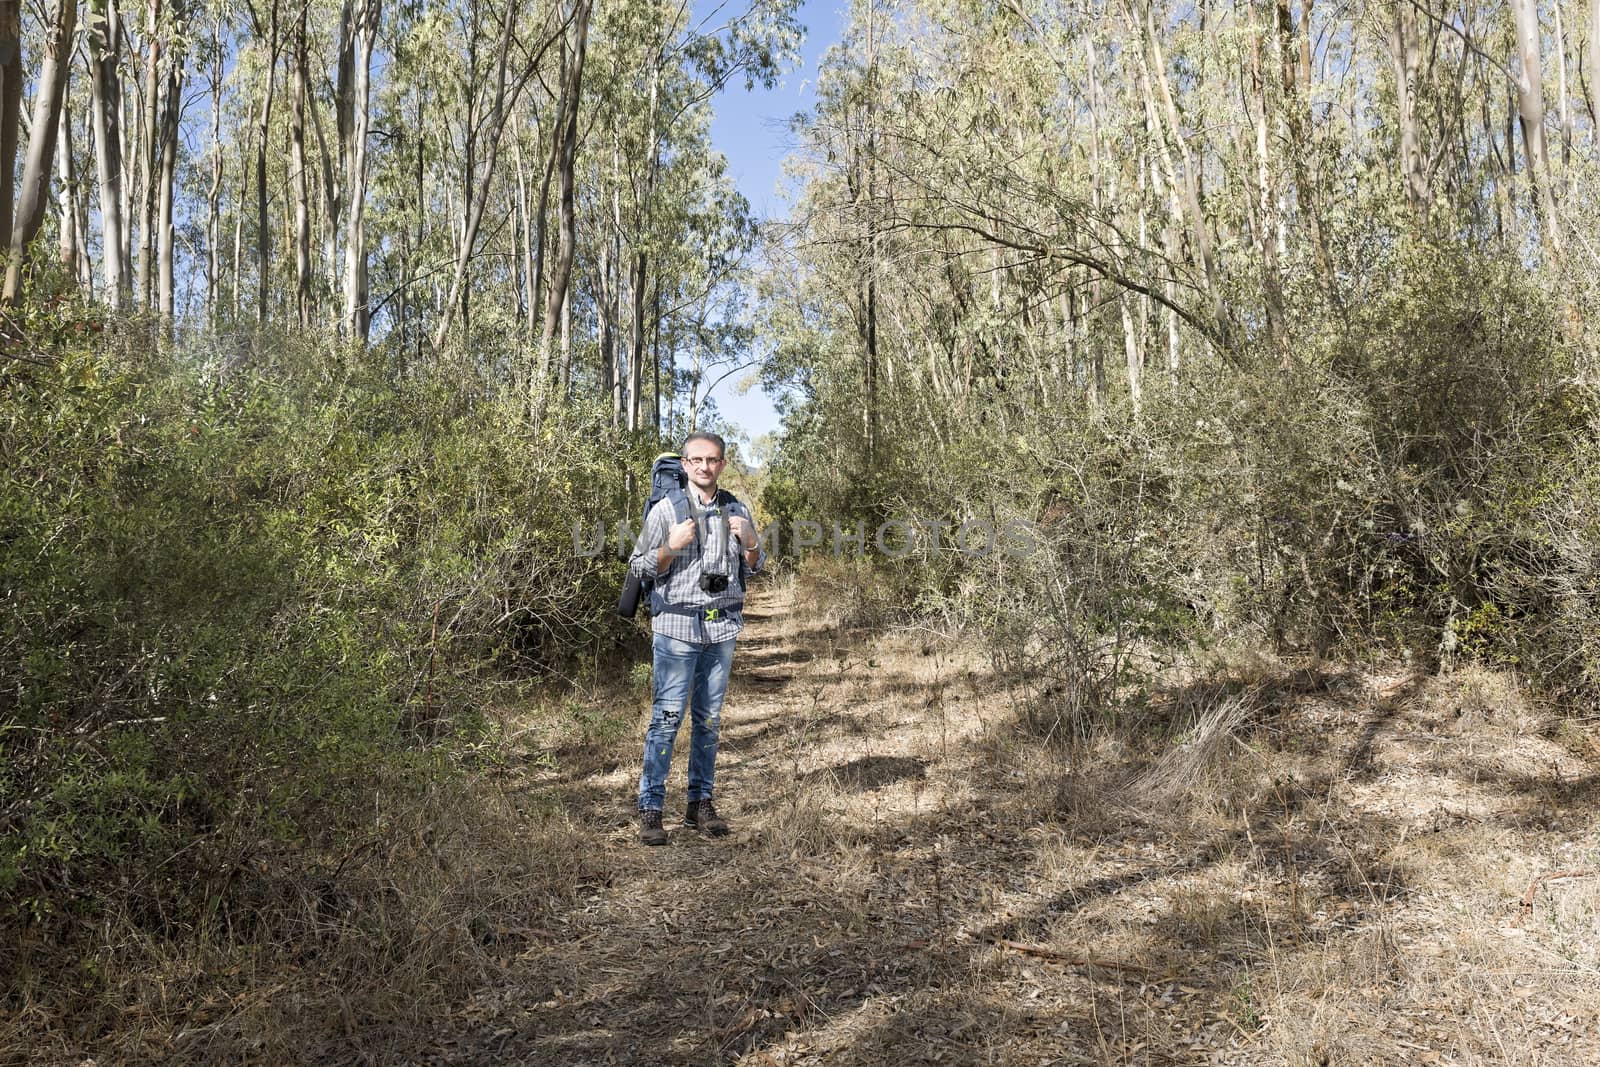 Hiker in the Sardinian of eucalyptus Forest with mirrorless camera